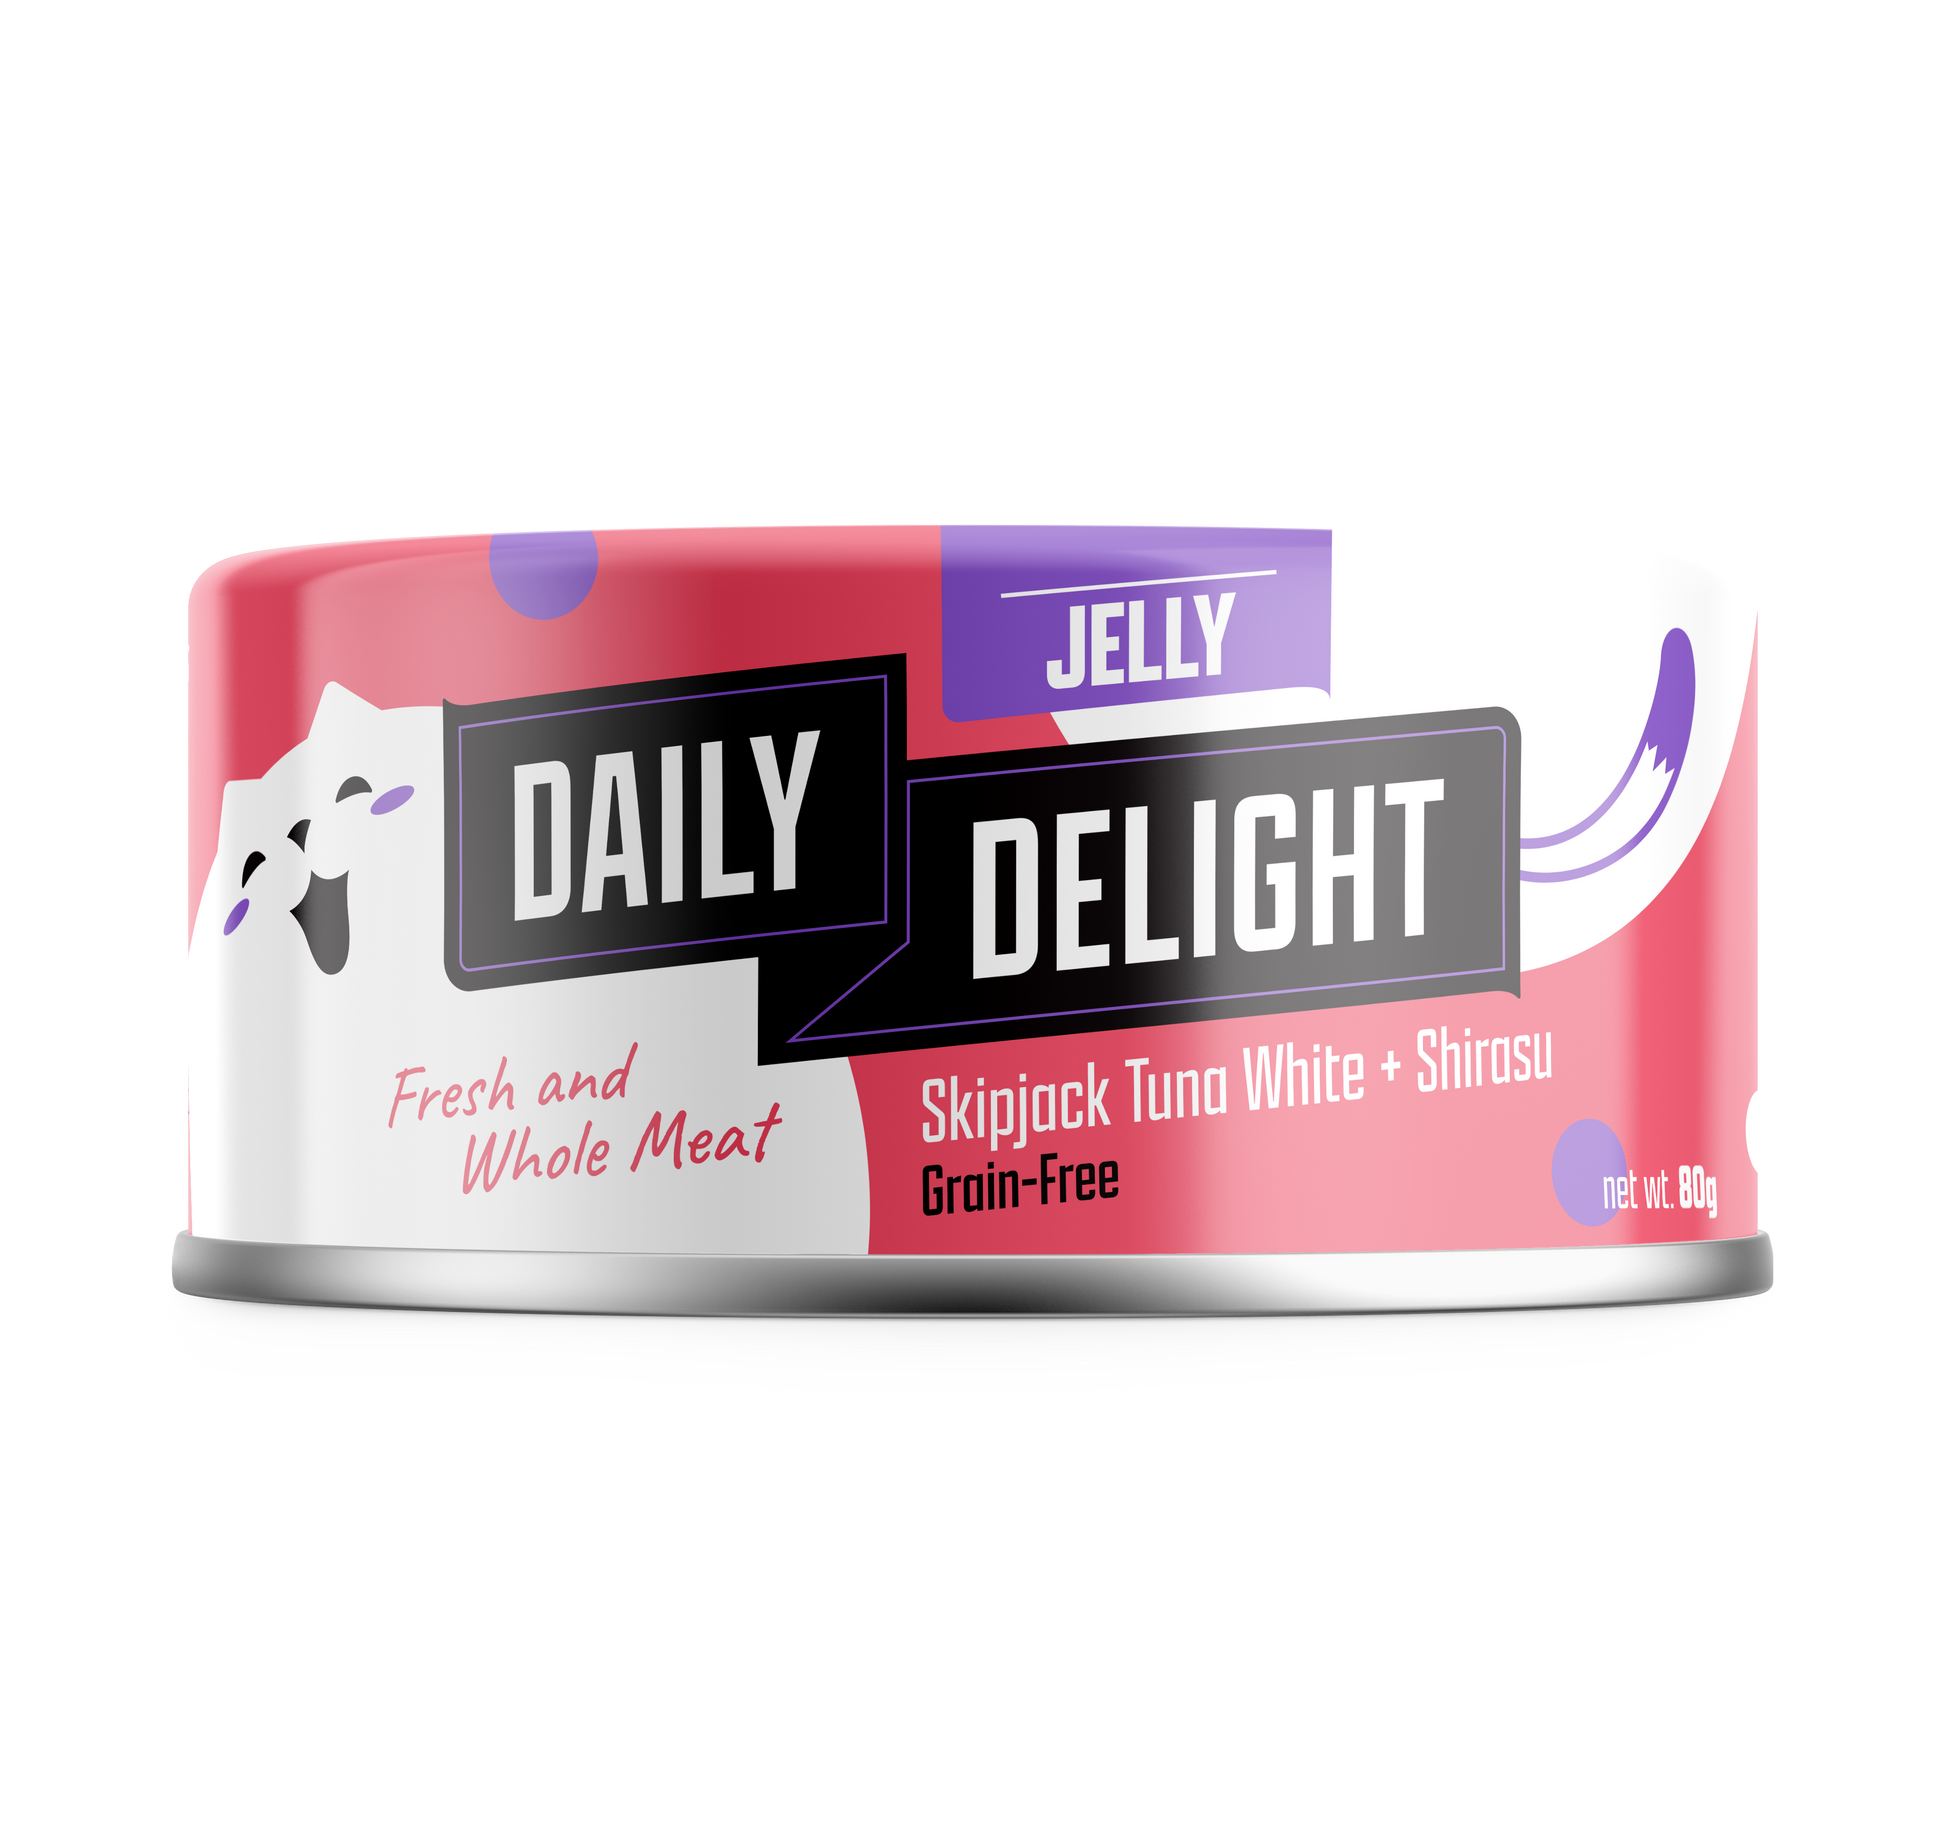 Daily Delight Jelly Skipjack Tuna White with Shirasu 80g Carton (24 Cans)-Daily Delight-Catsmart-express